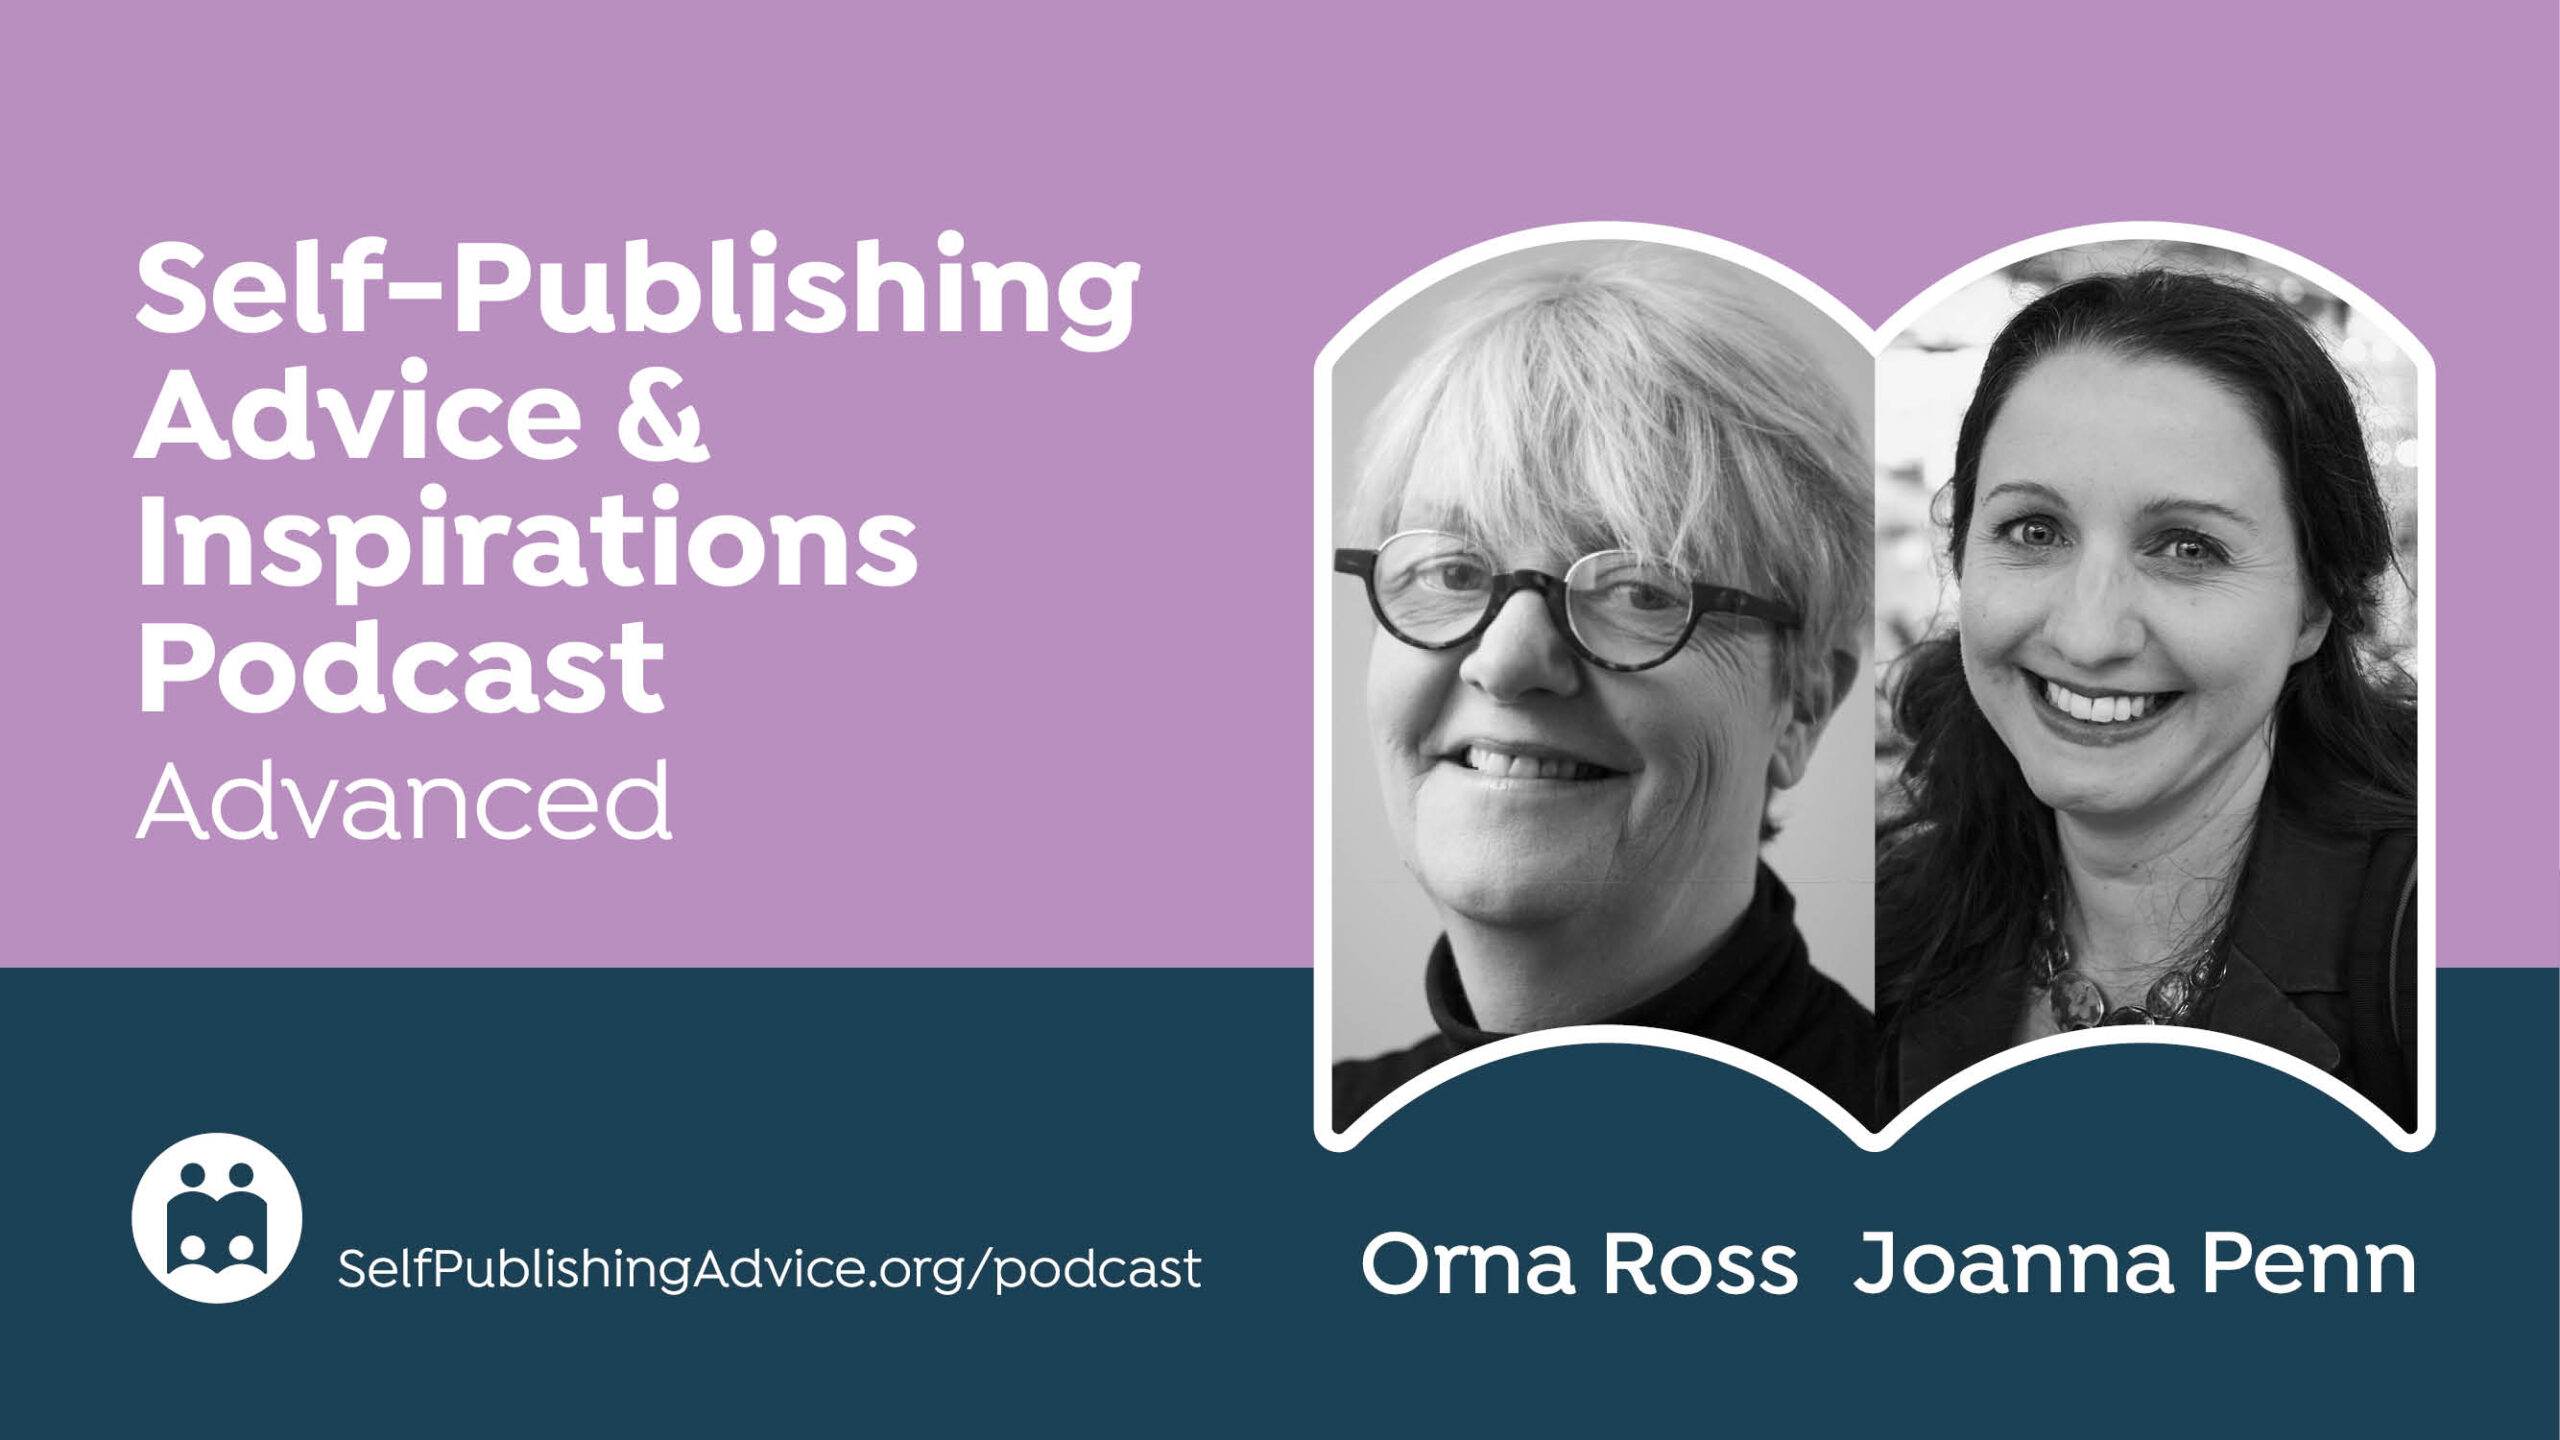 When To Quit Writing And Publishing: Advanced Self-Publishing Podcast With Orna Ross And Joanna Penn